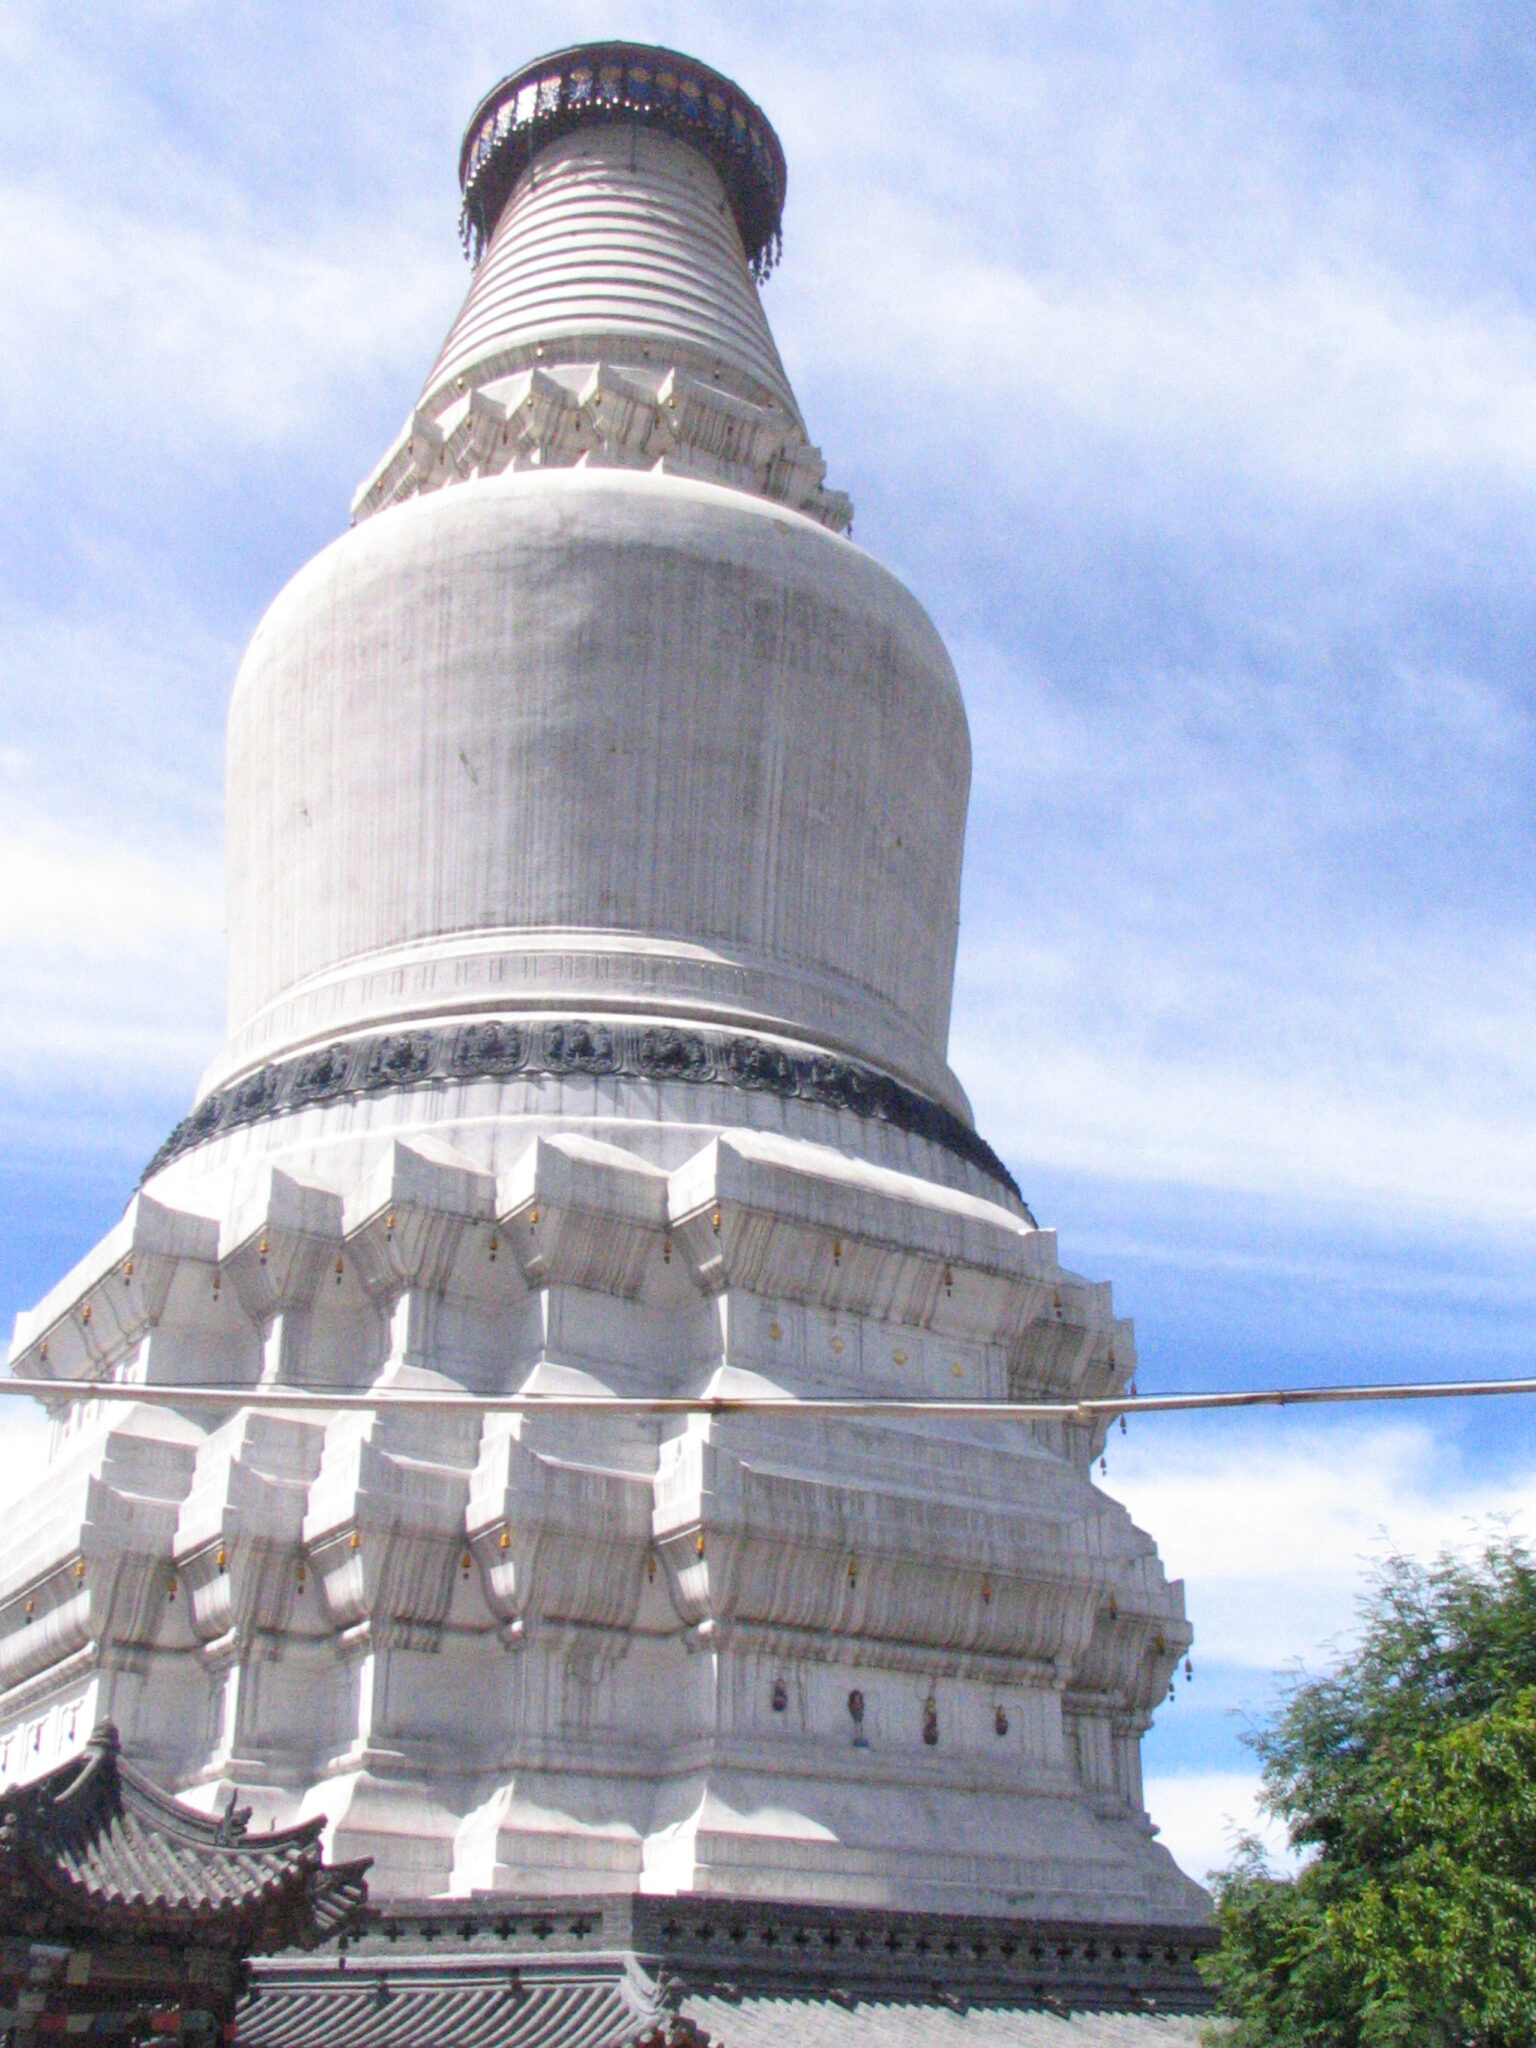 View from bottom of tall, brilliant white stupa against blue sky with light clouds